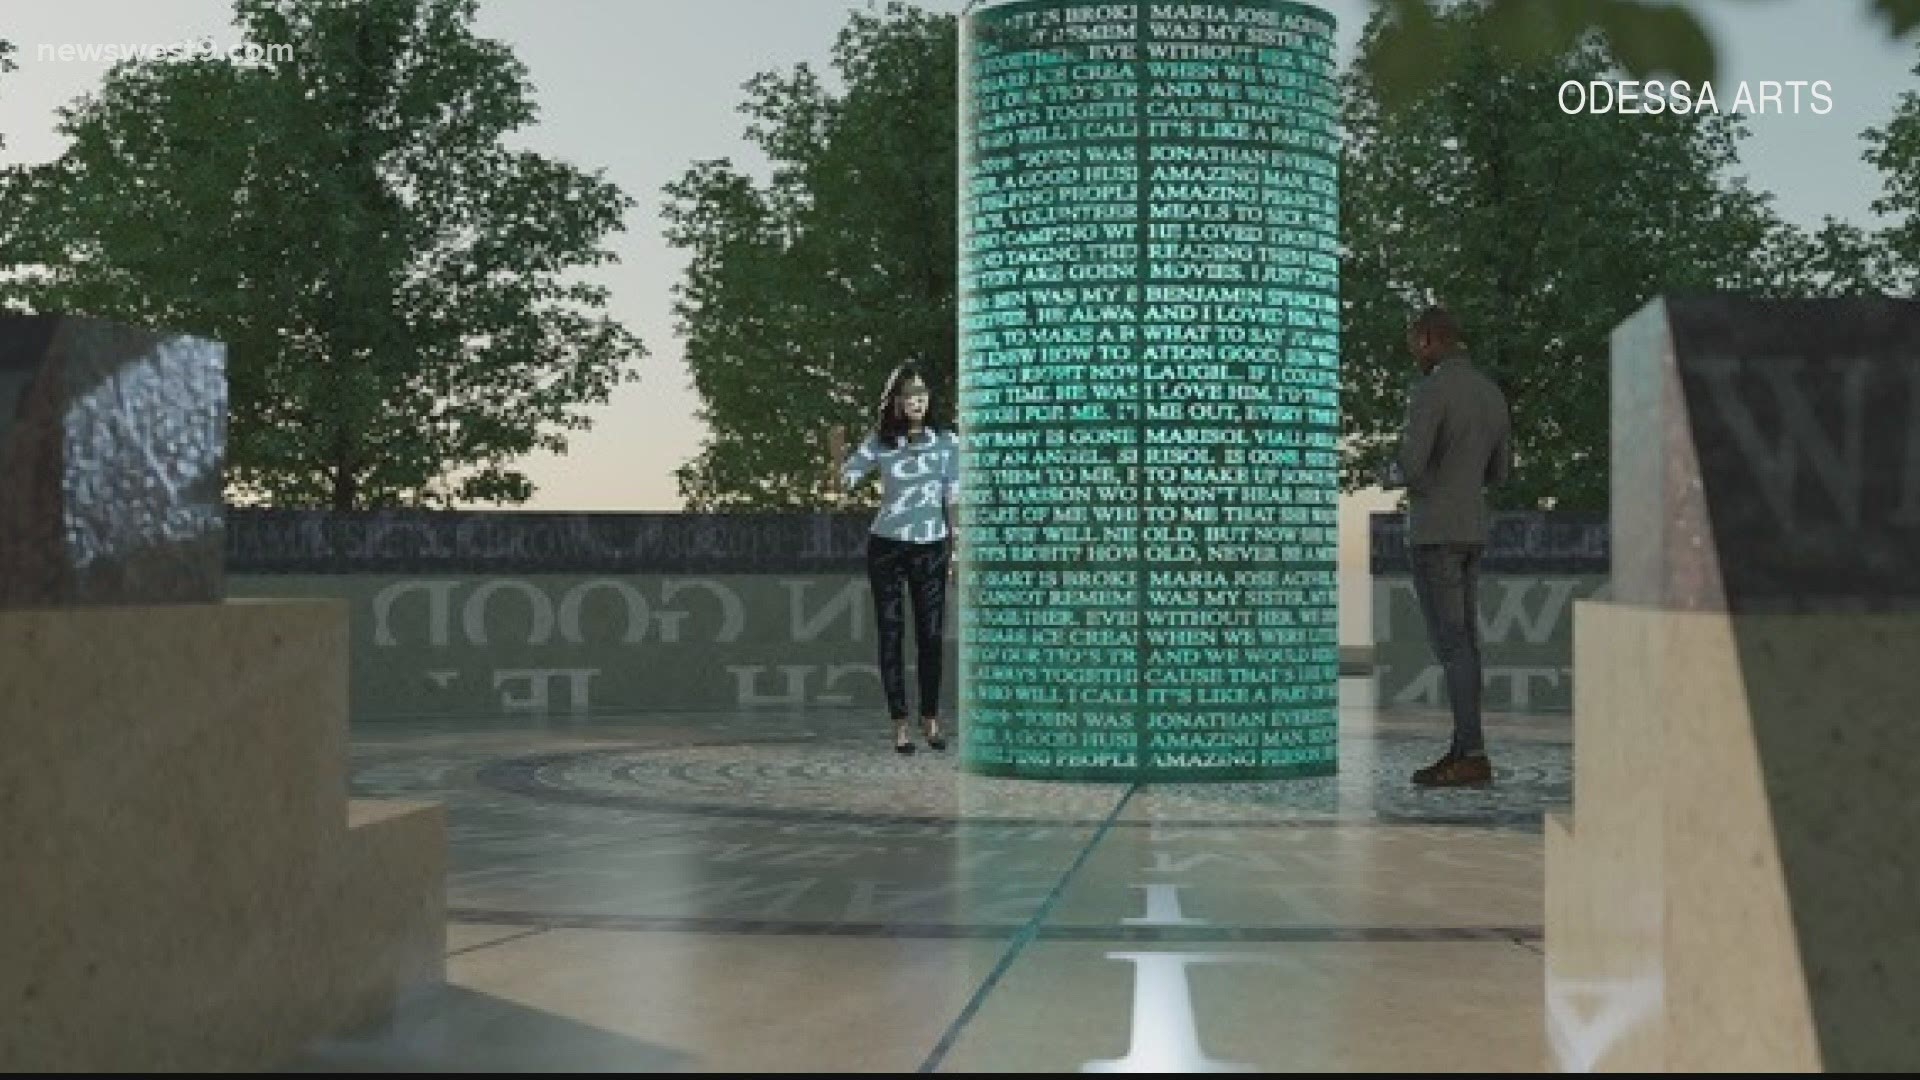 The memorial honors the victims, survivors and first responders of the Aug. 31 mass shooting.